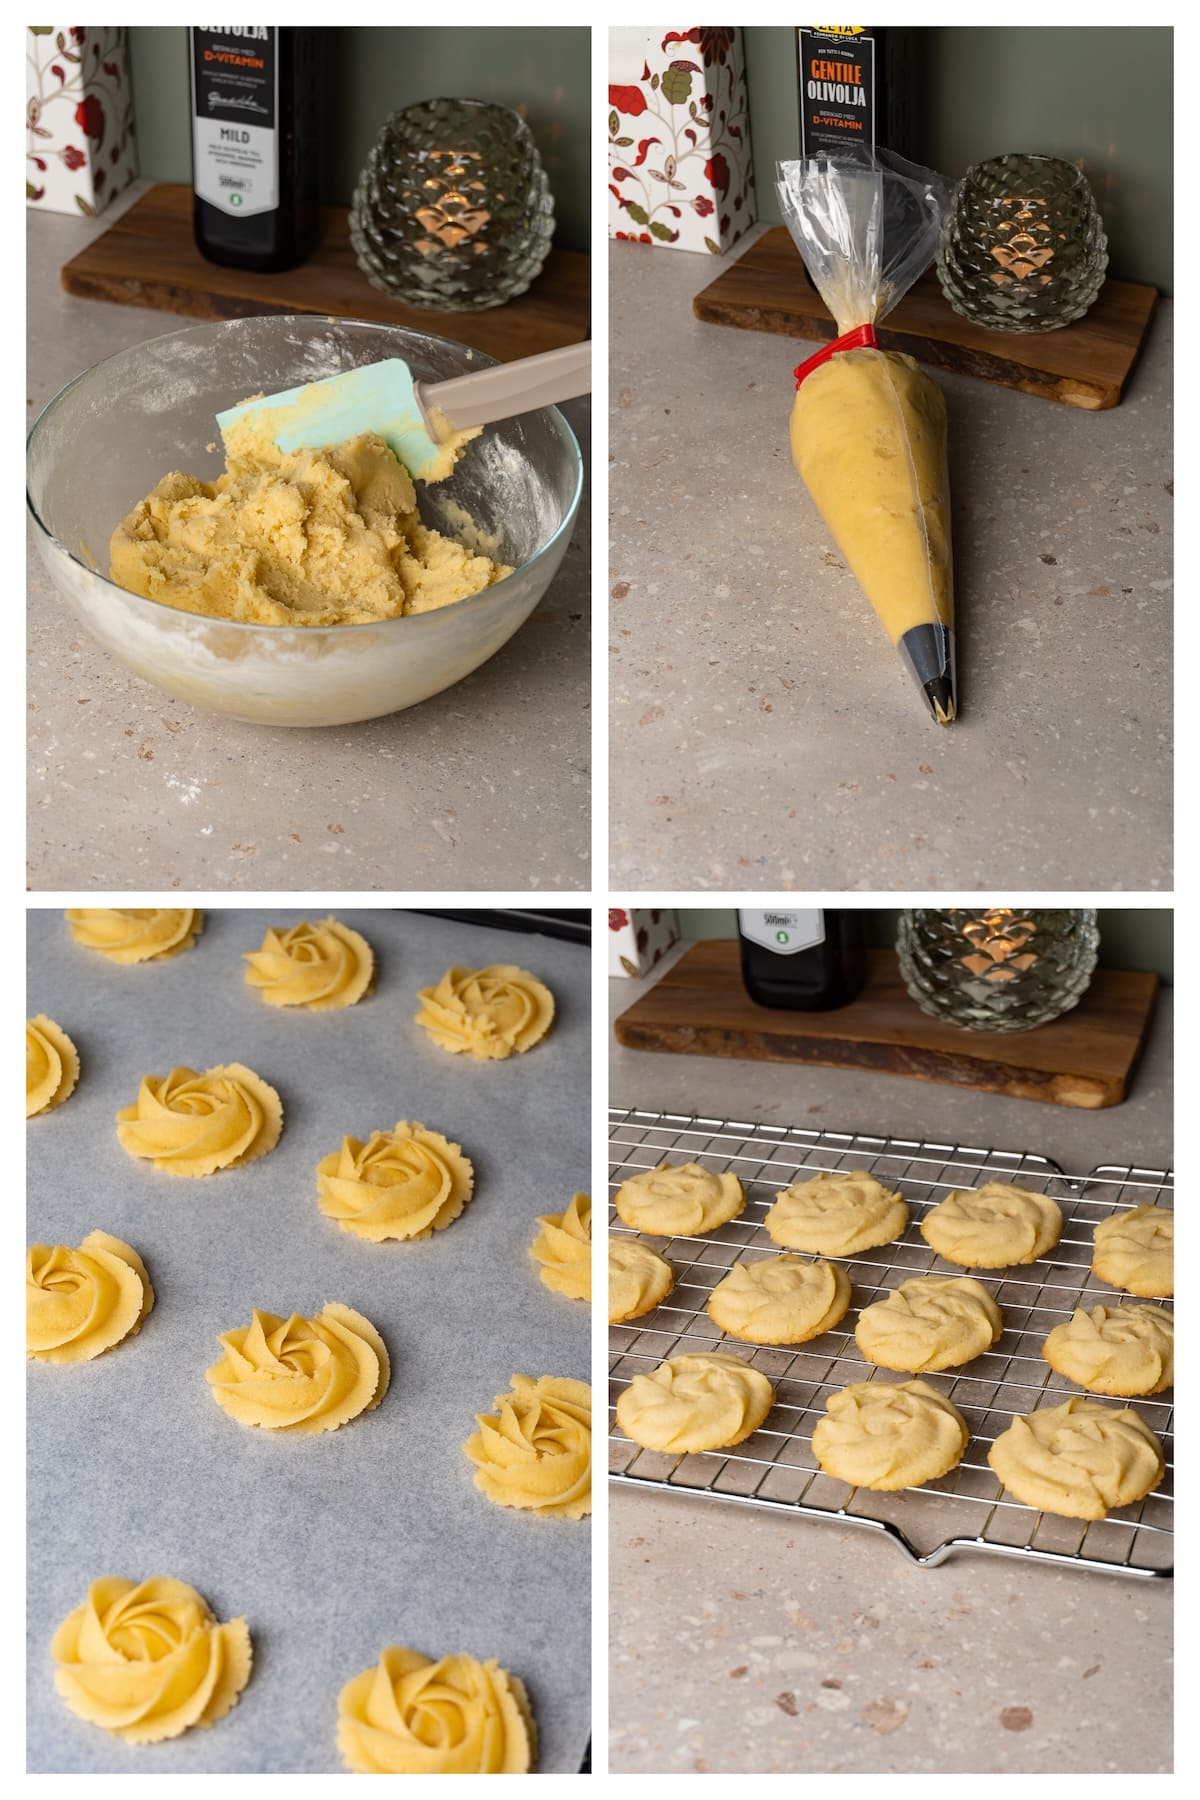 A collage image shows how to pipe and bake butter cookies in 4 steps.